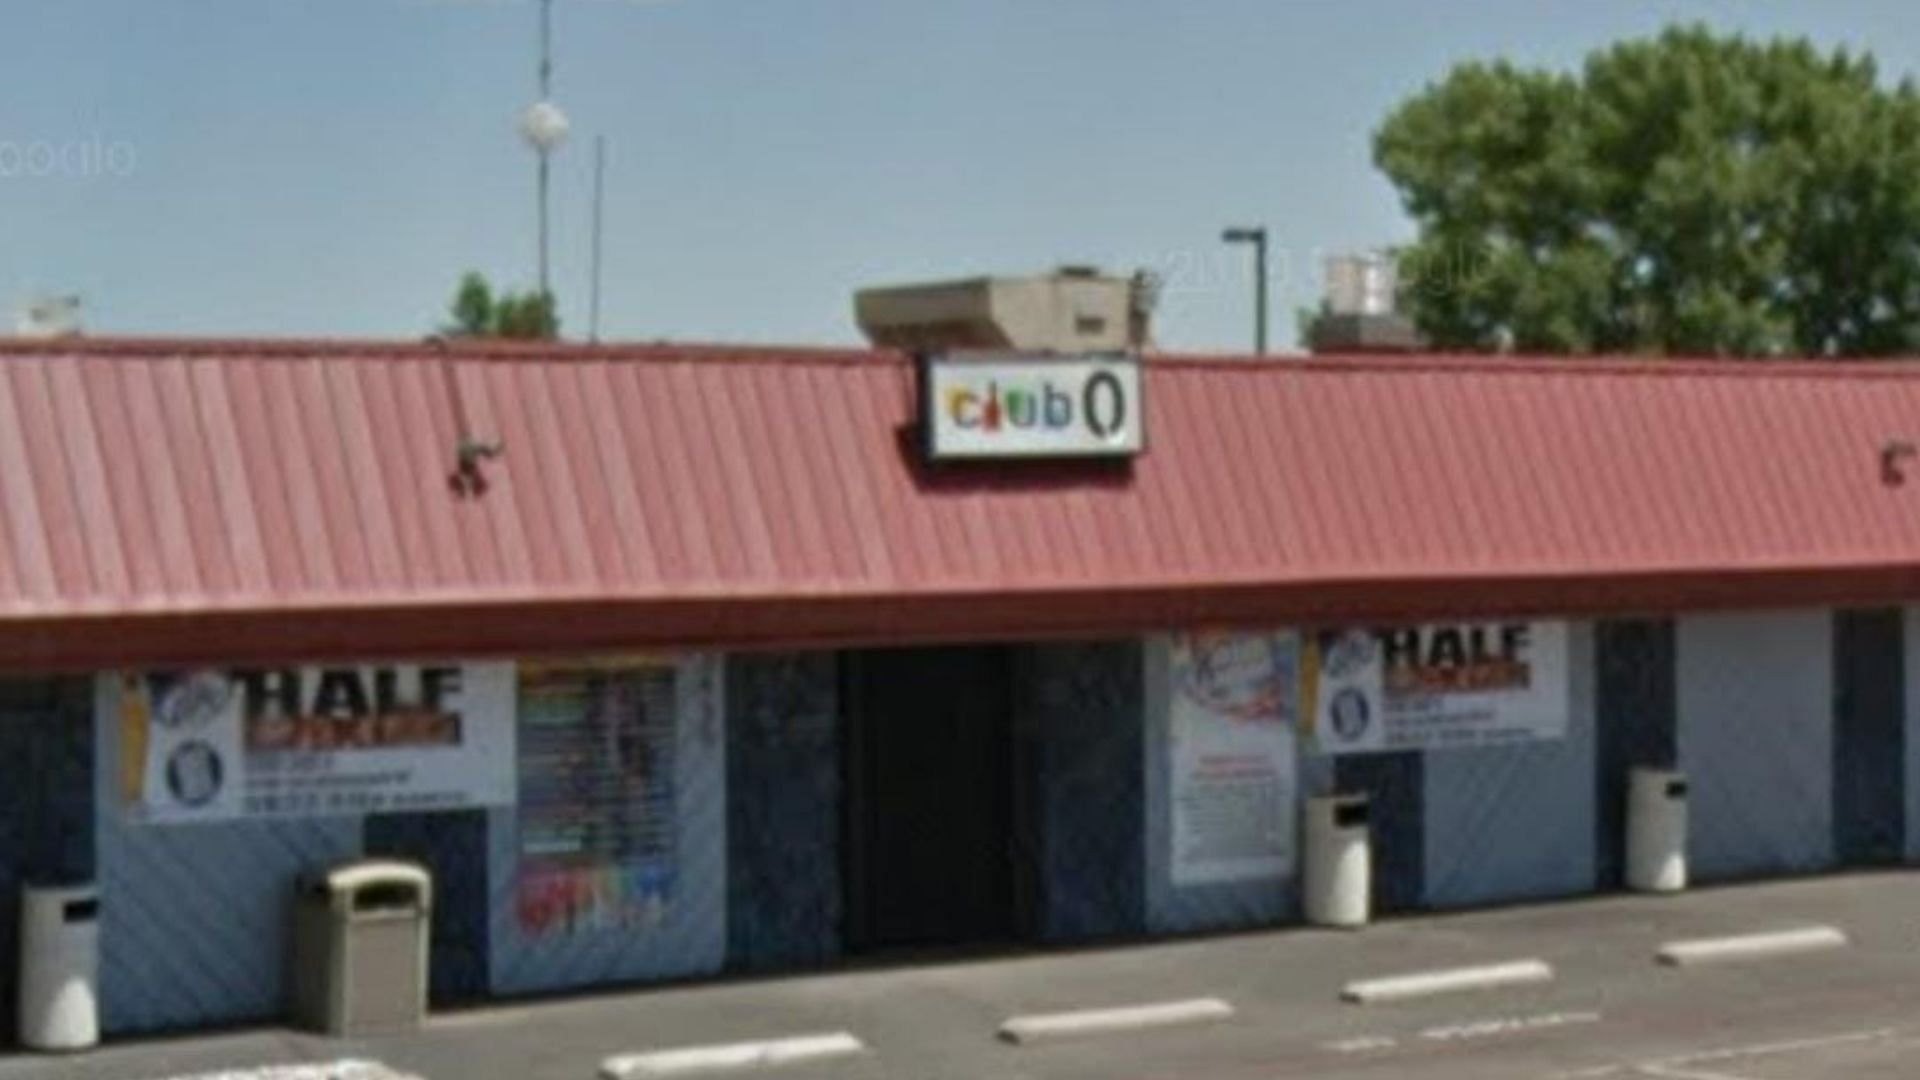 Mass shooting at a Colorado Springs gay bar left five people dead and multiple injured (Image via Google Street View)